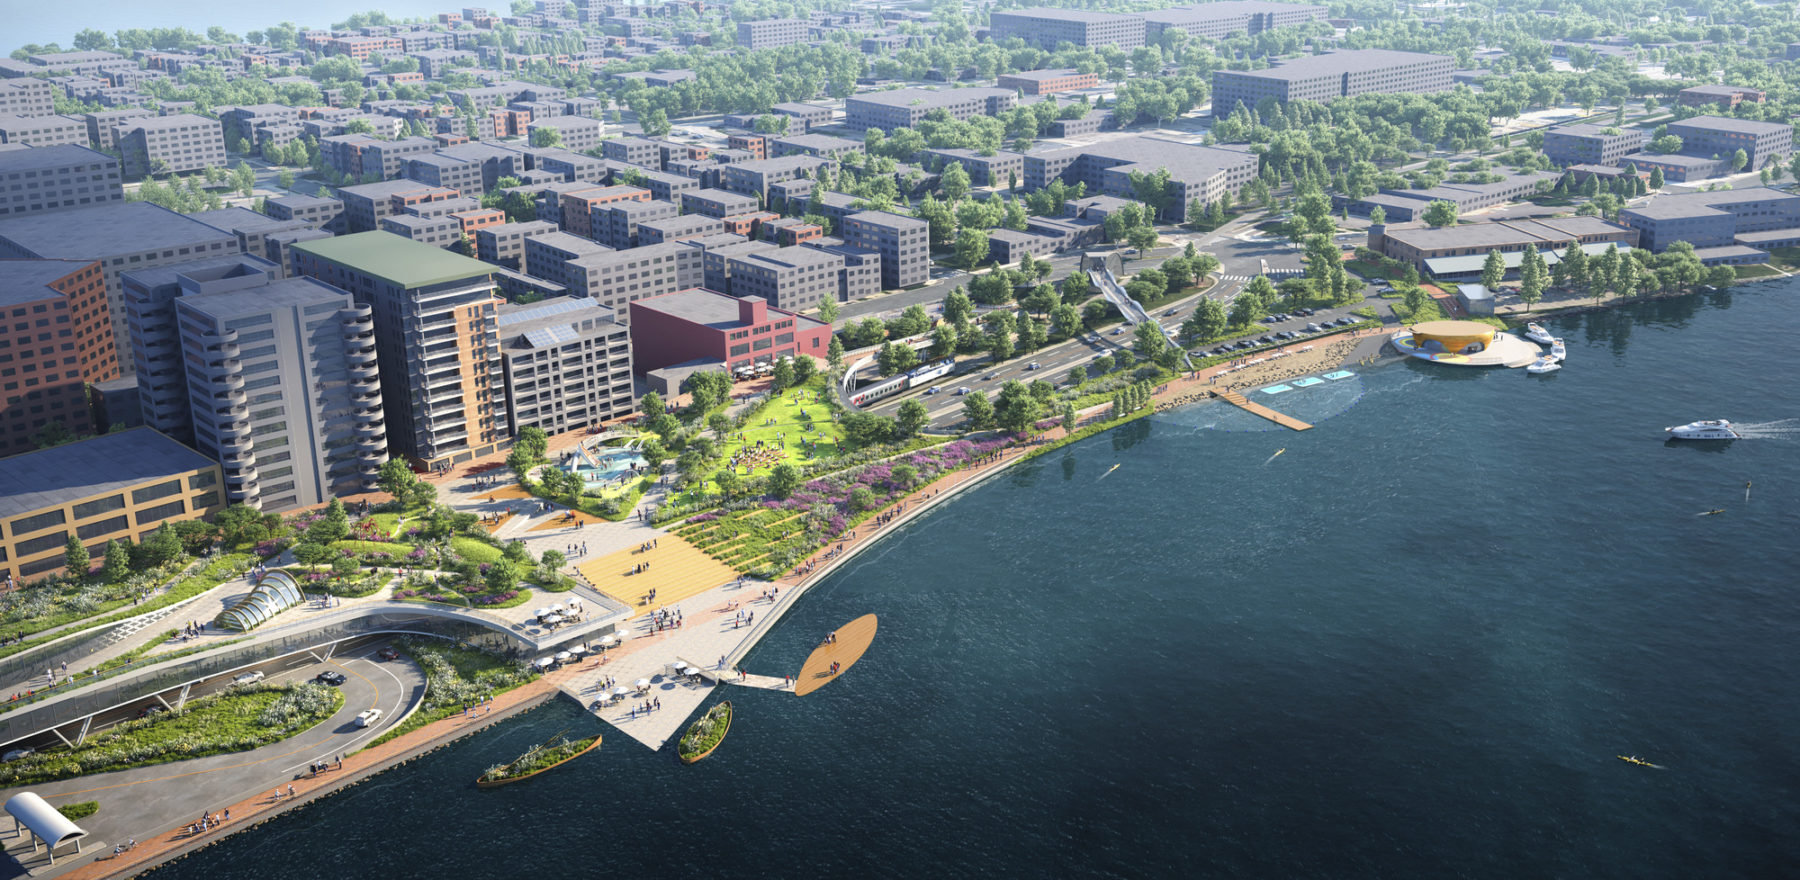 A bird's eye view rendering of Law Park Ledge, an elevated park on the shore of Lake Monona